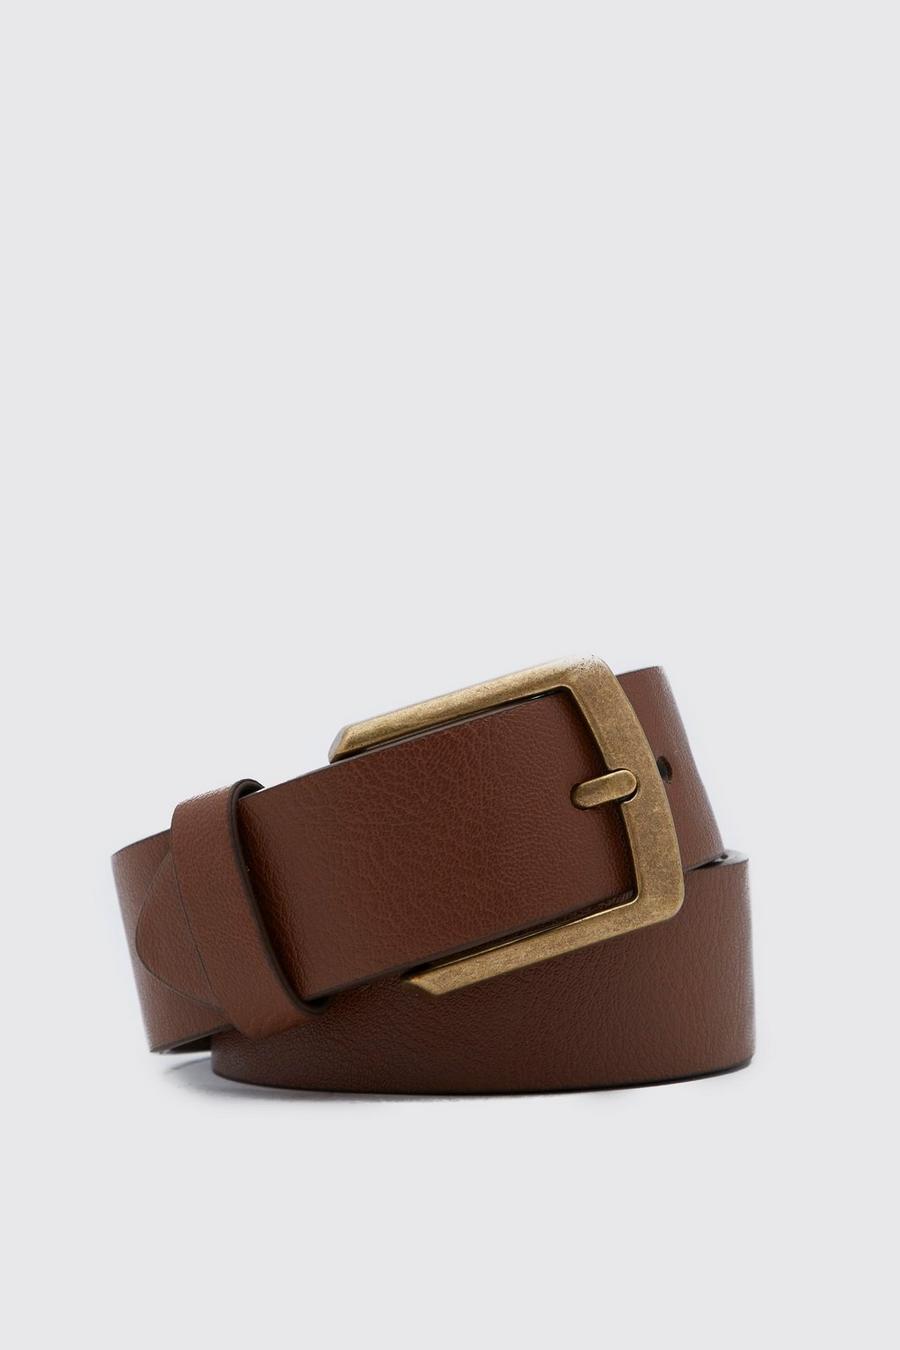 Tan Casual Leather Look Jeans Belt image number 1